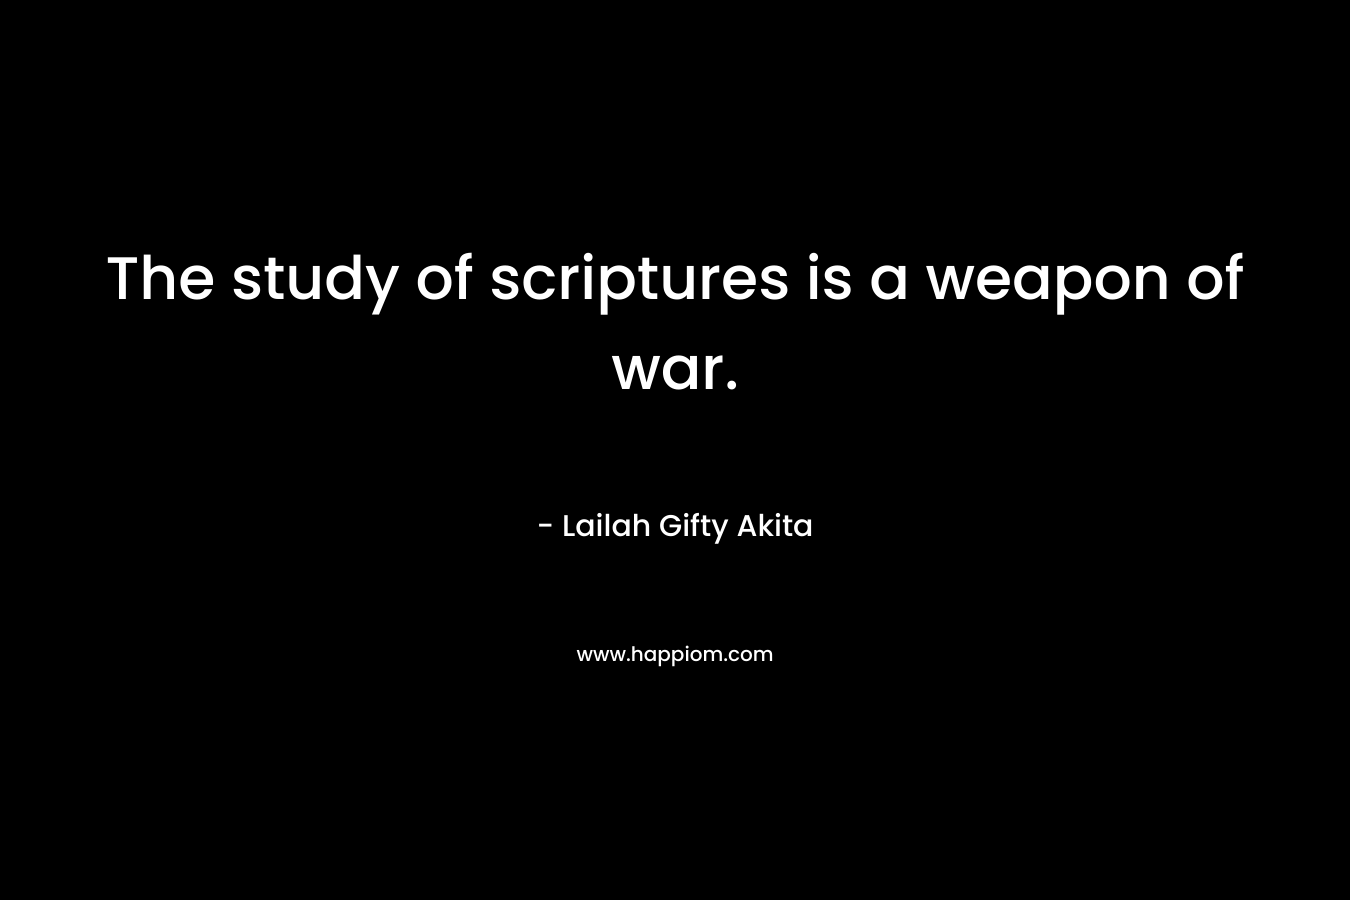 The study of scriptures is a weapon of war.